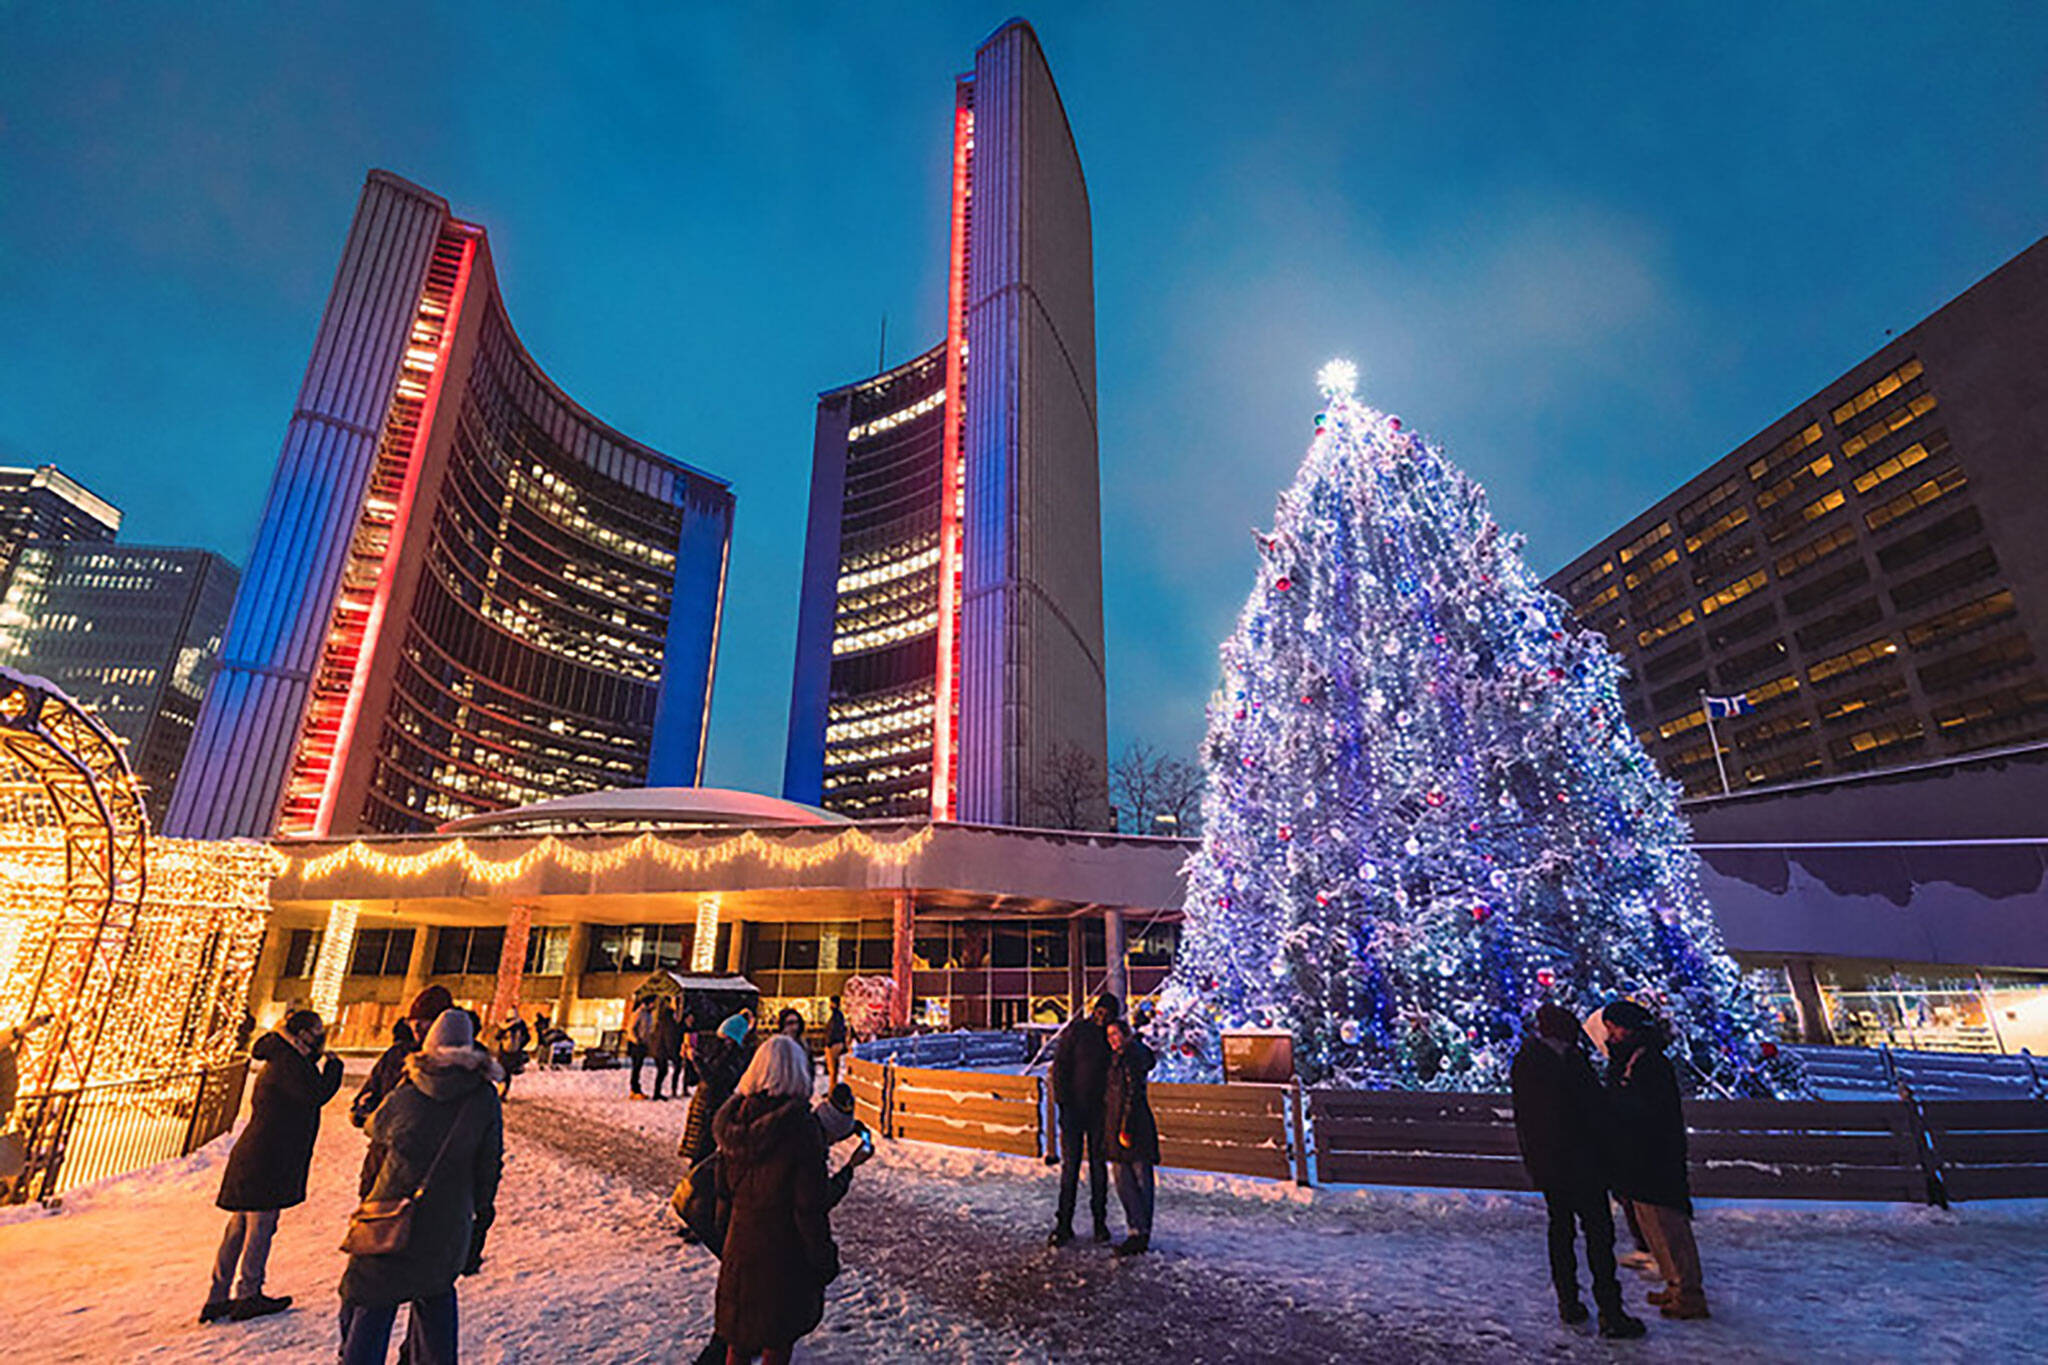 Cavalcade of Lights will return to Toronto this year but without fireworks